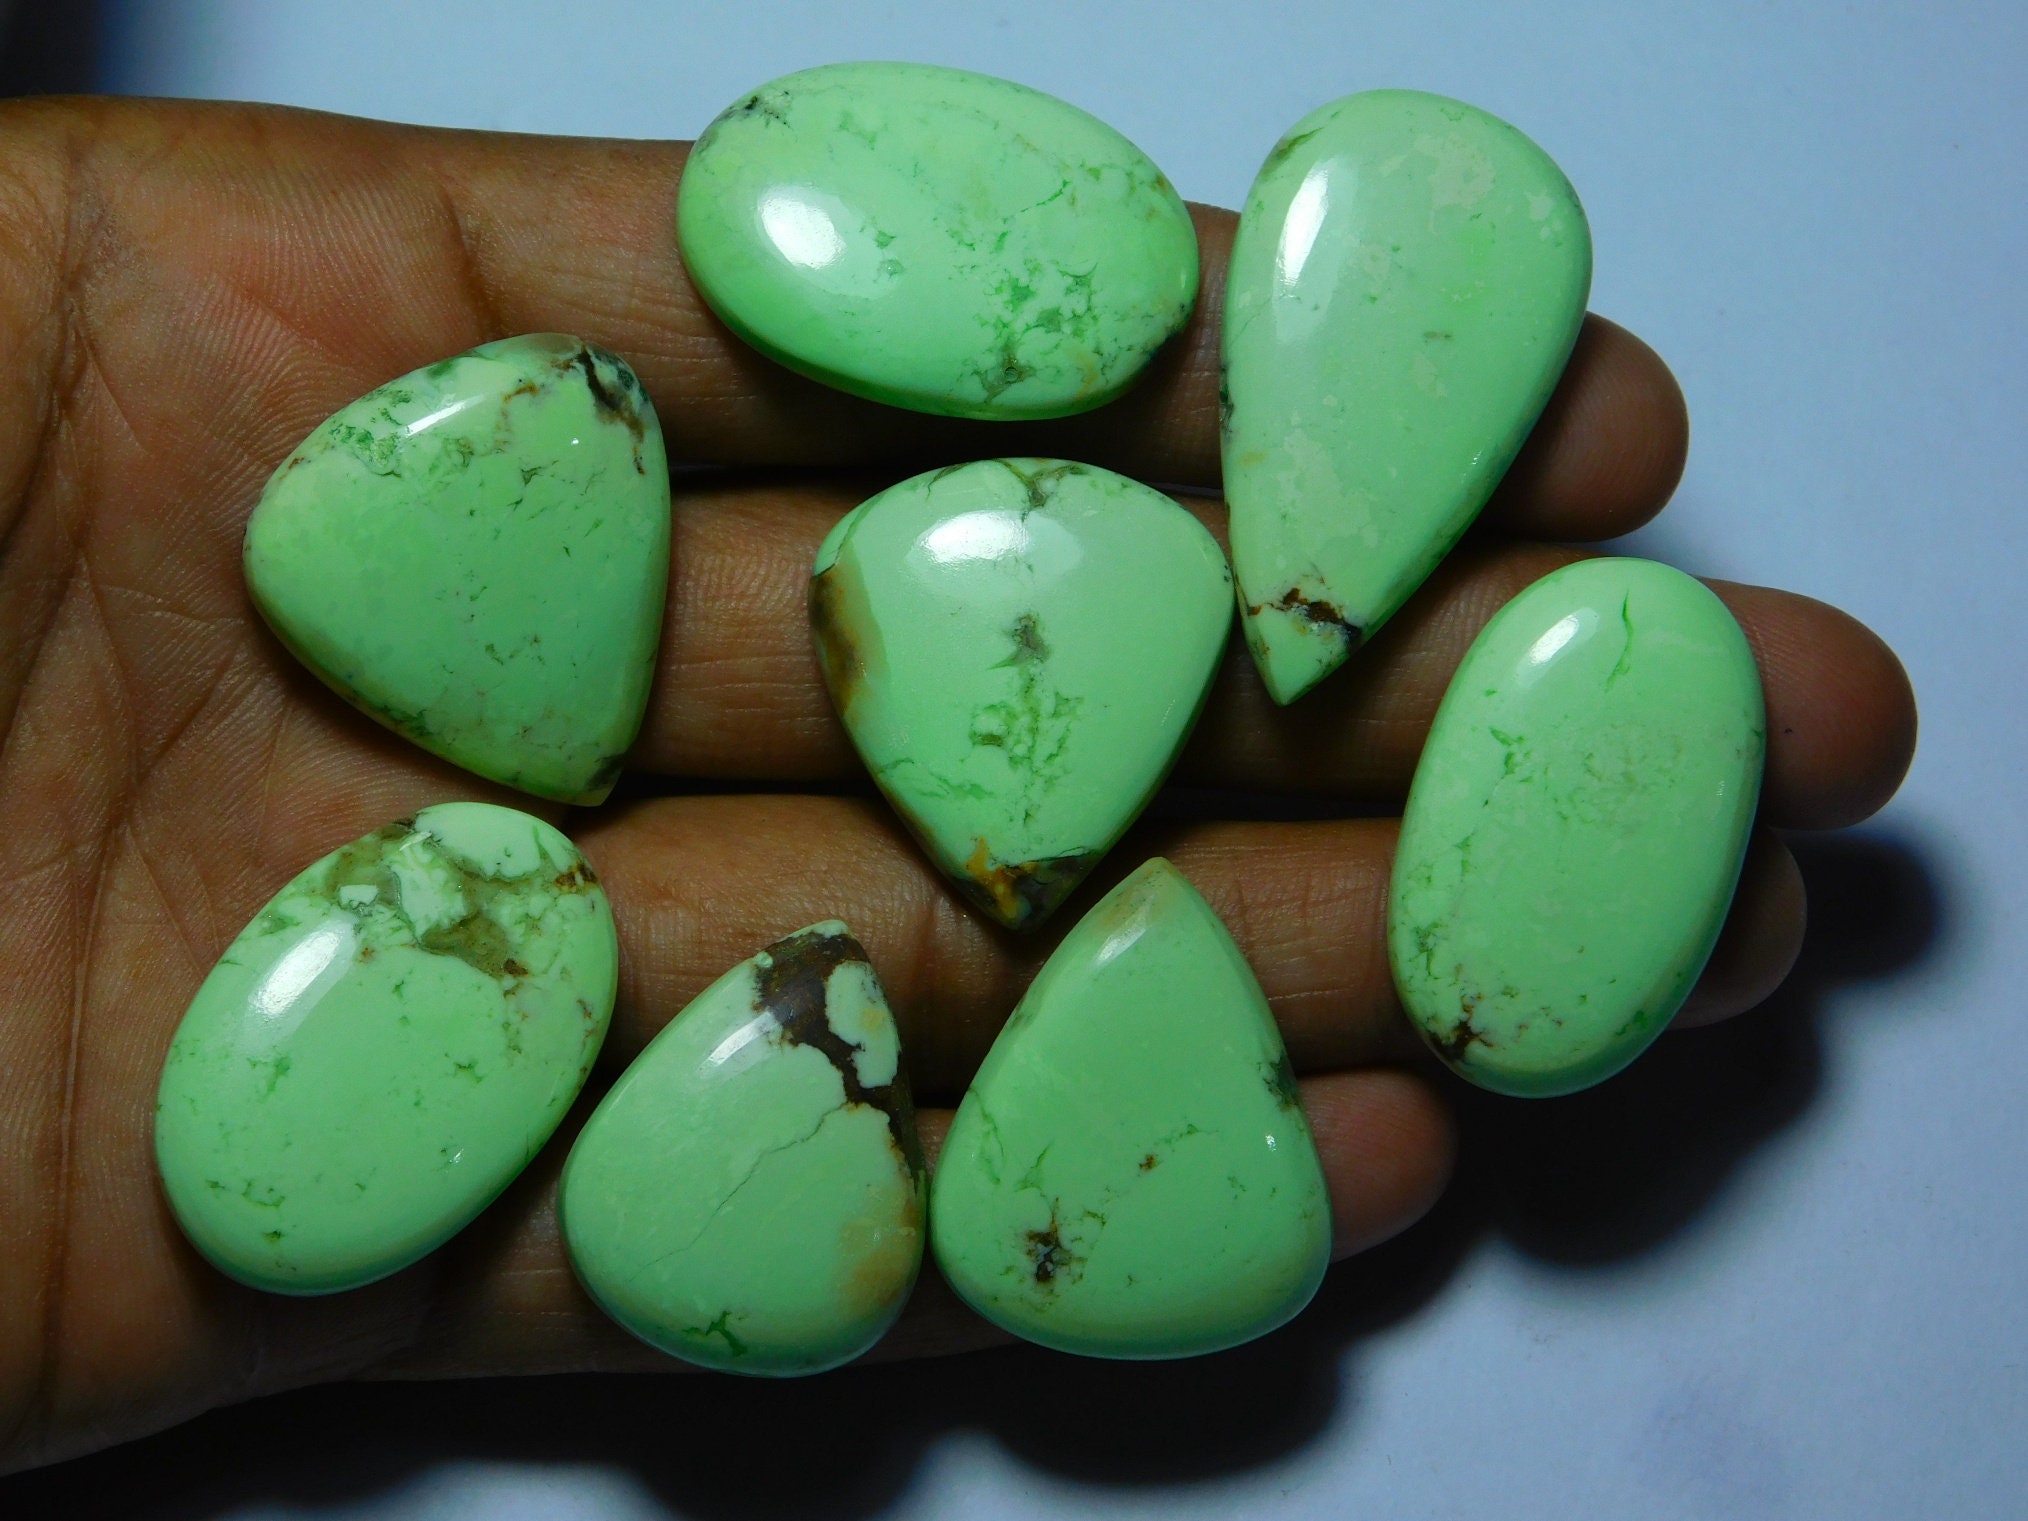 Lemon Chrysoprase Gemstone Cabochon Use For All Silver Jewelry Making 39X15X5 mm Rectangular Shape Loose Chrysoprase AAA Quality 31 CRT